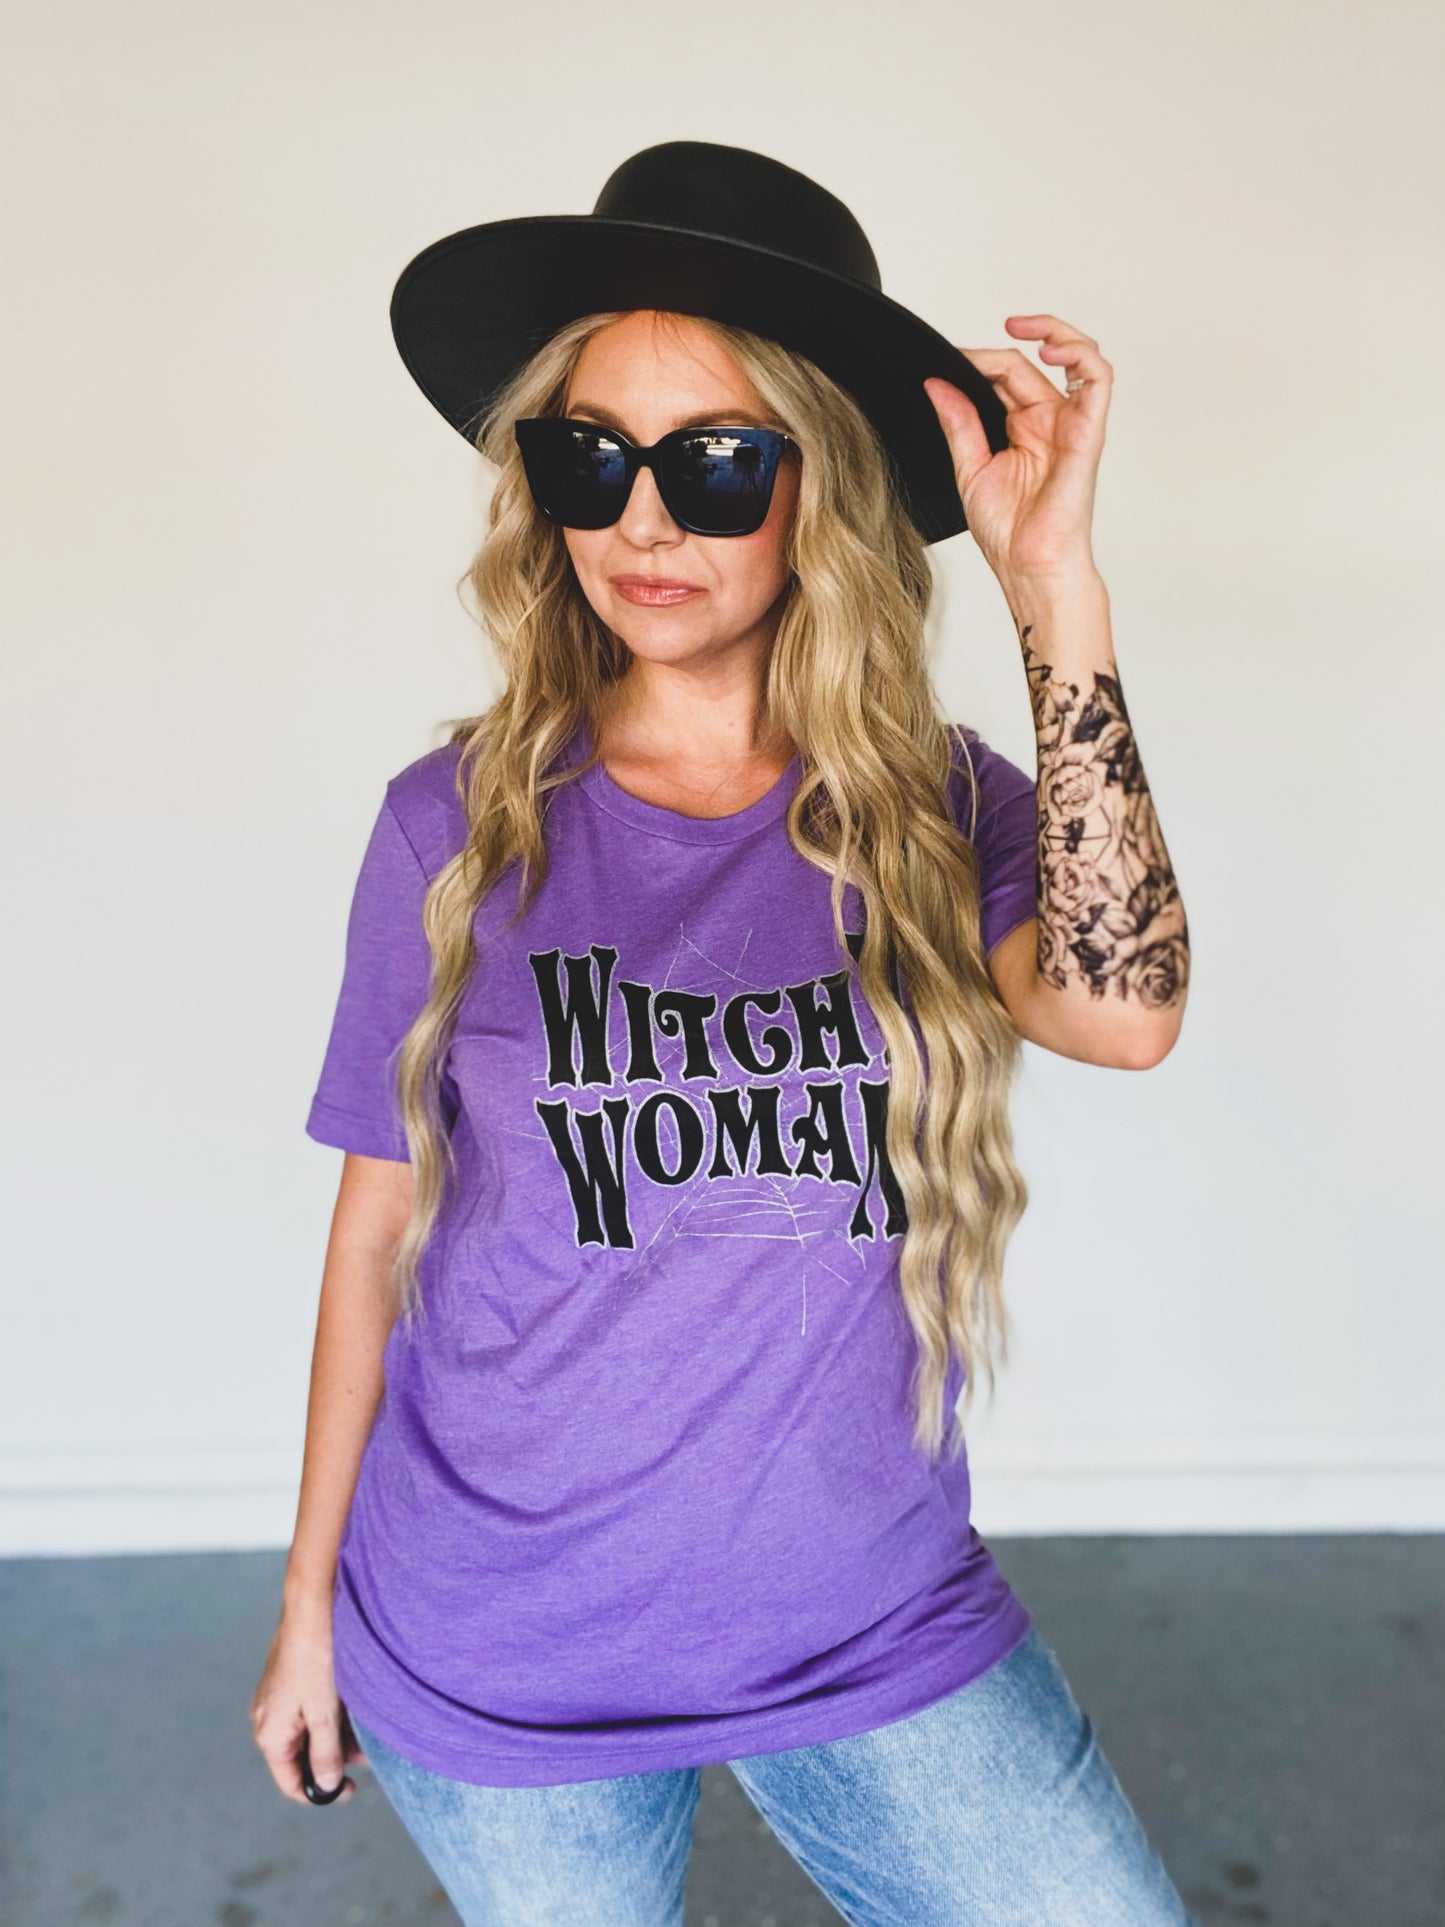 Witchy Woman T